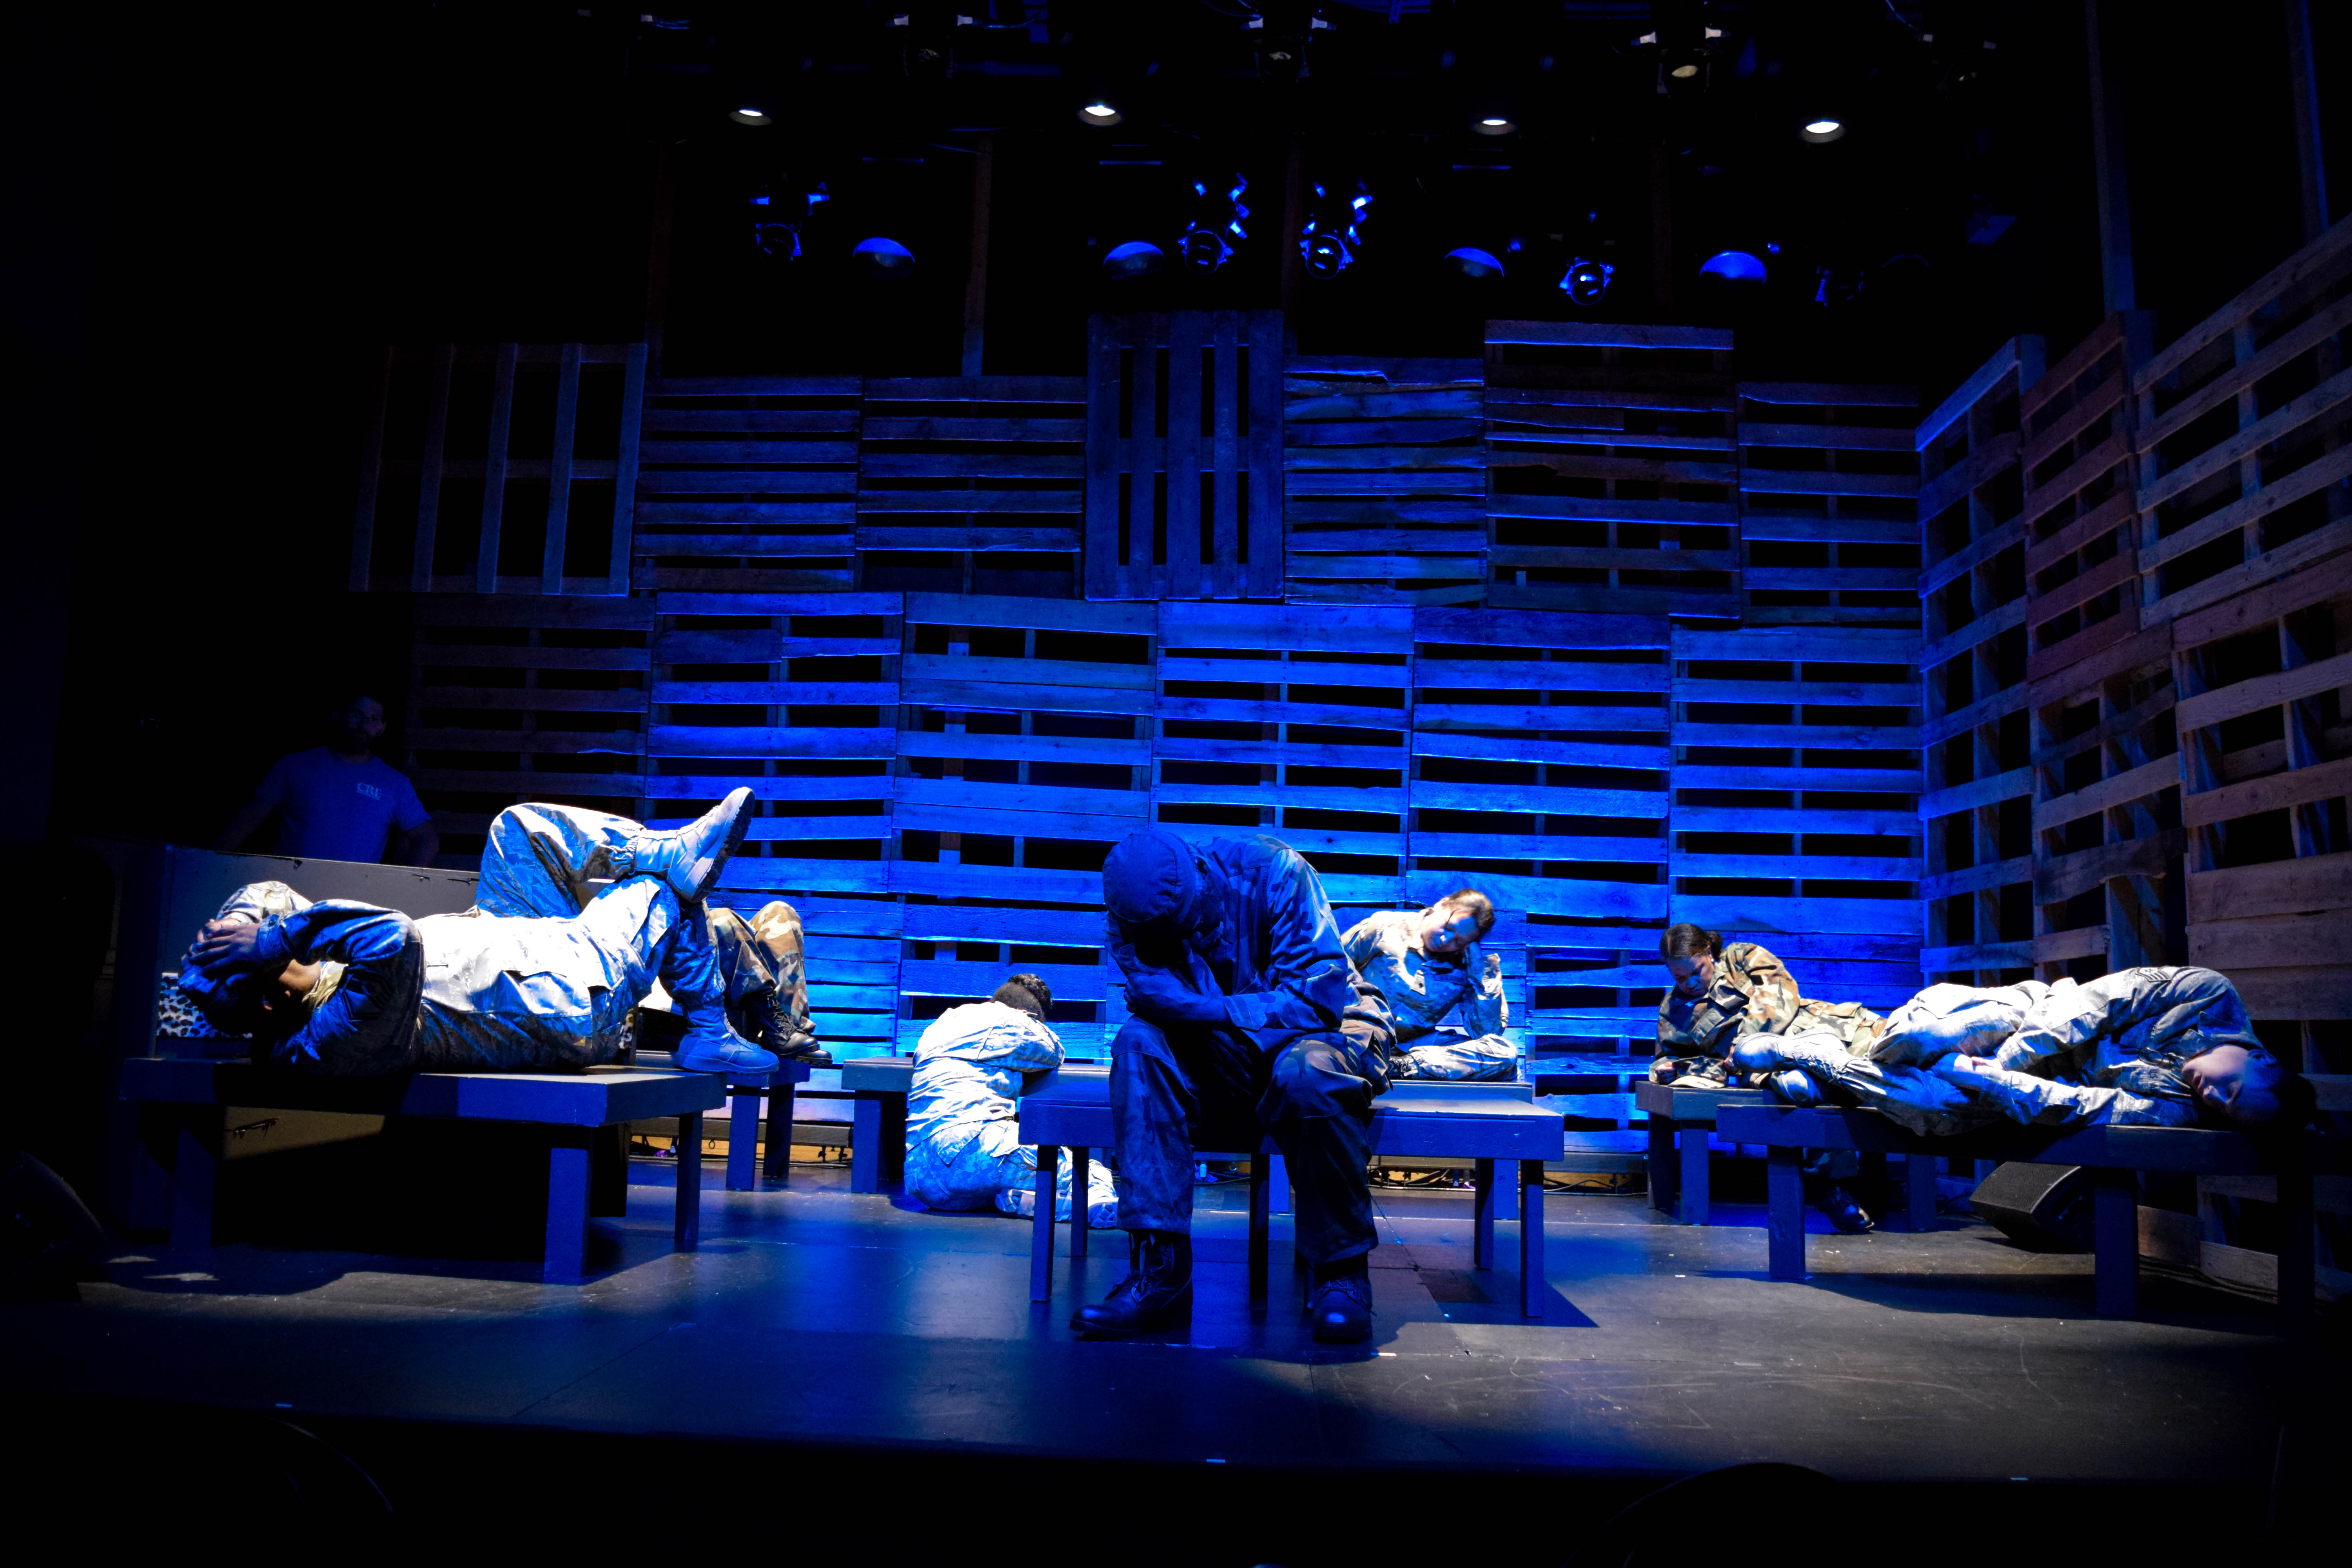 Soldiers sleeping in a performance of Marching On at The Wallis.  PHOTO CREDIT: Nate Albus